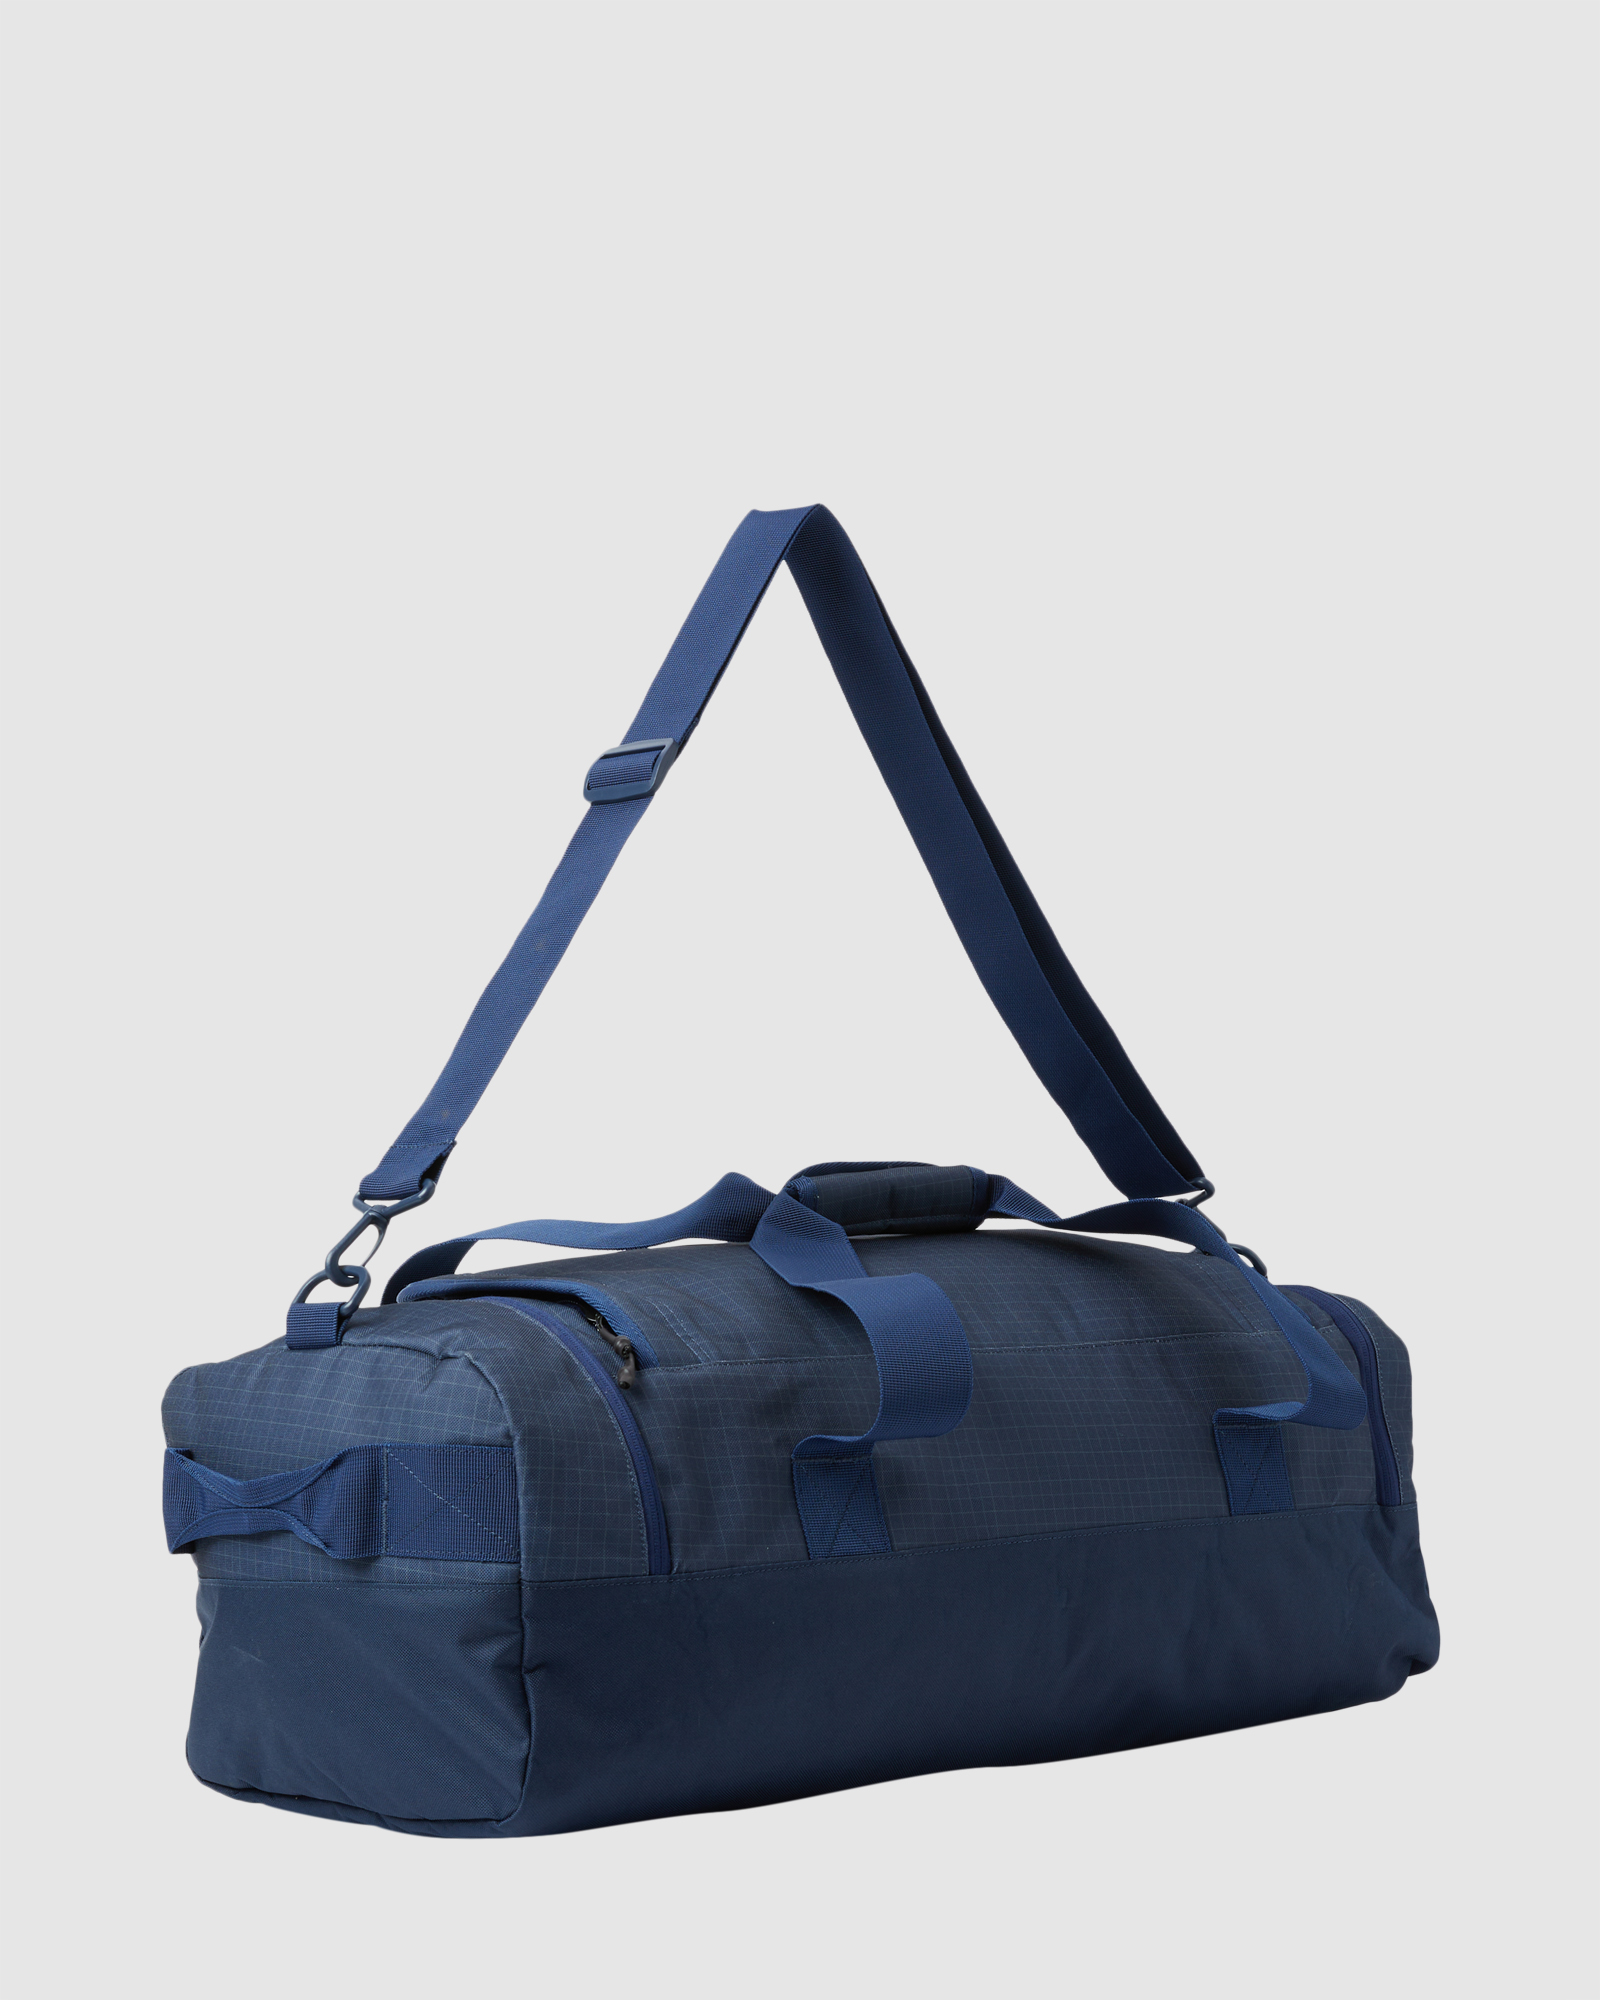 Quiksilver Shelter 40L Duffle Bag - Naval Academy | SurfStitch